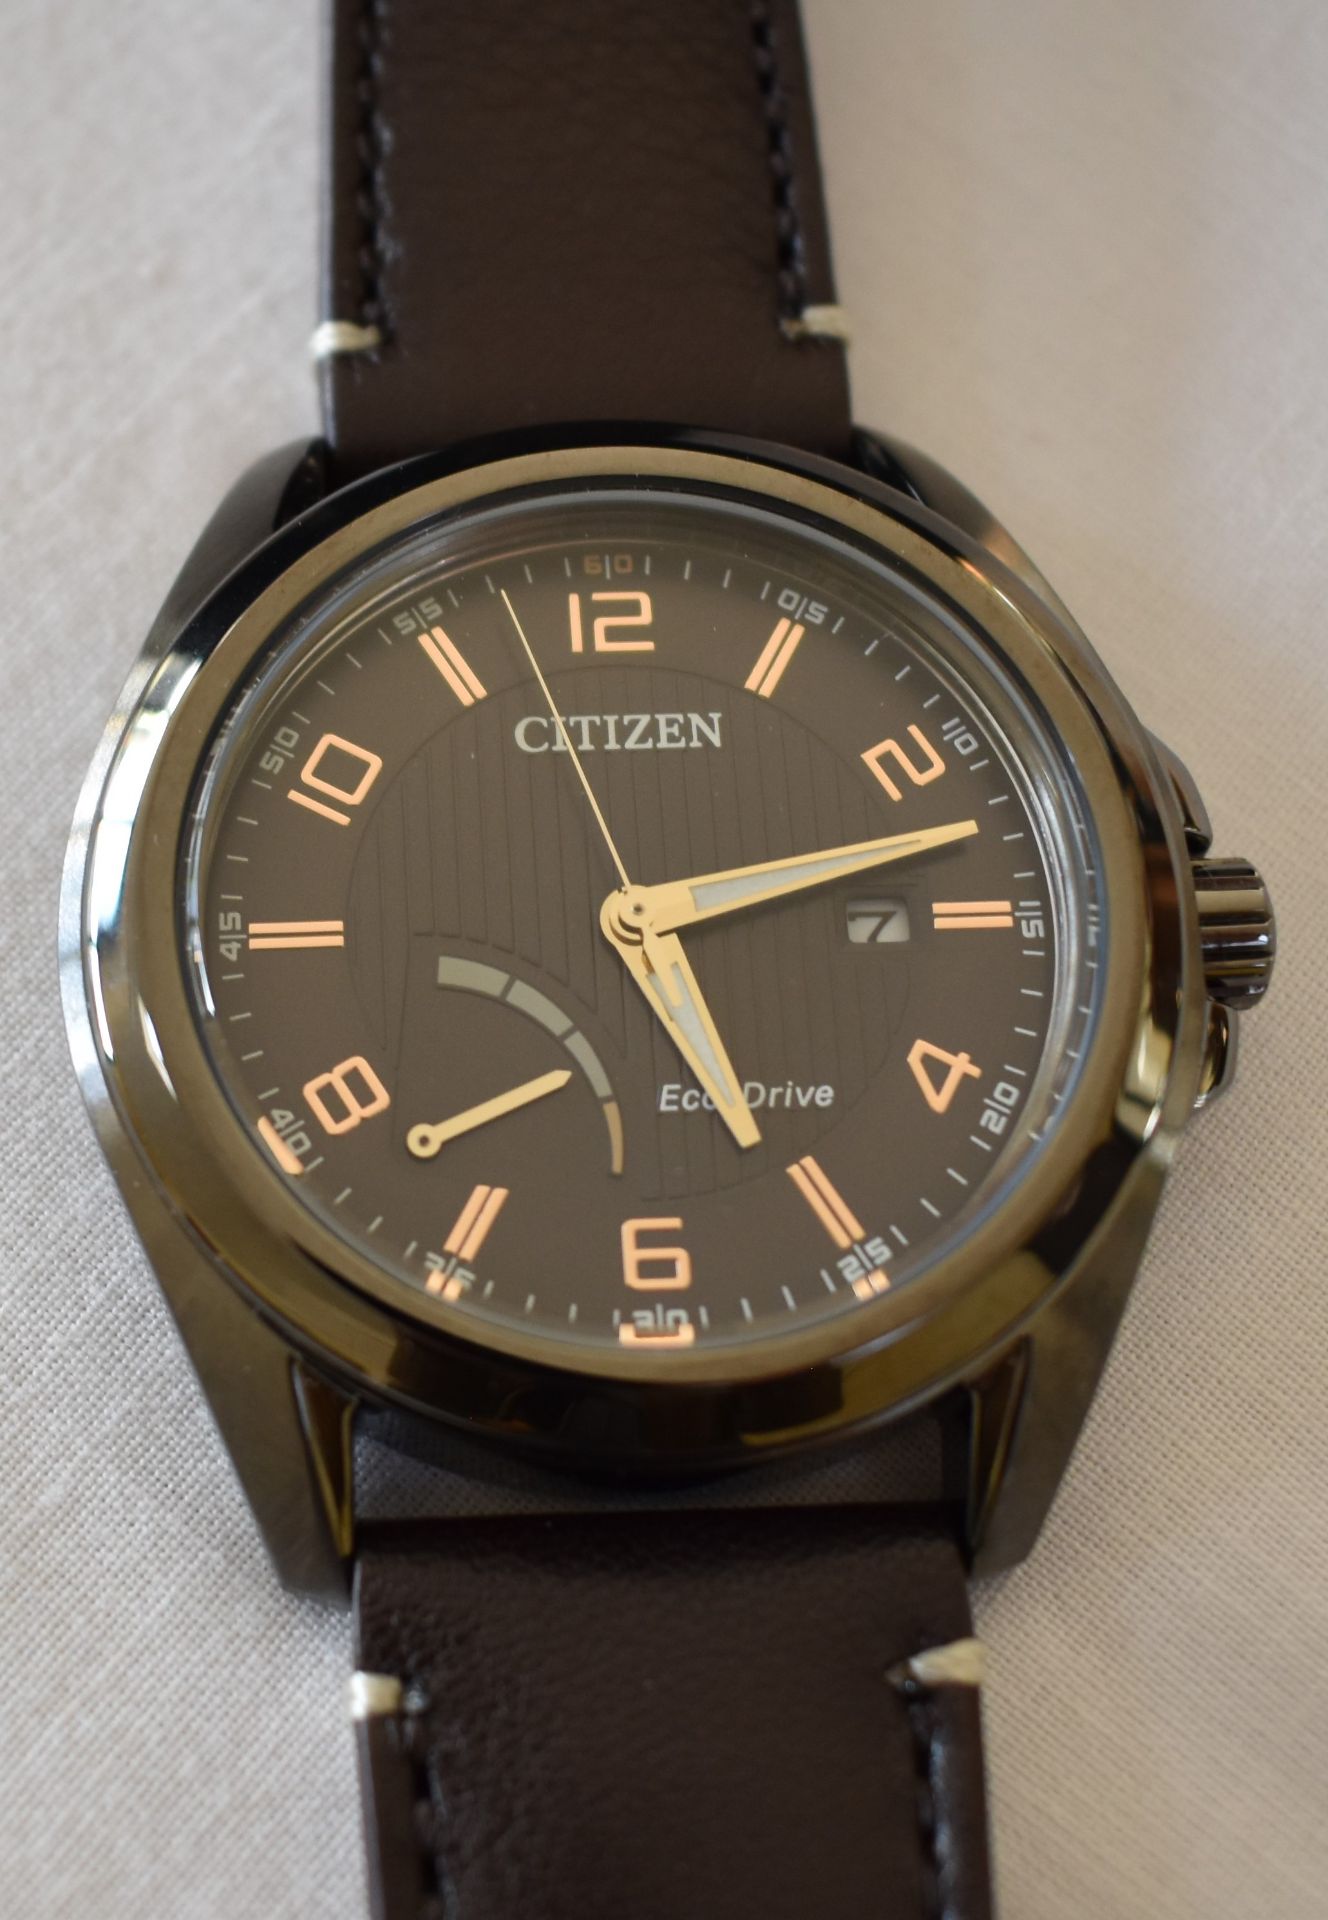 Citizen Men's Watch AW7057-18H - Image 3 of 3